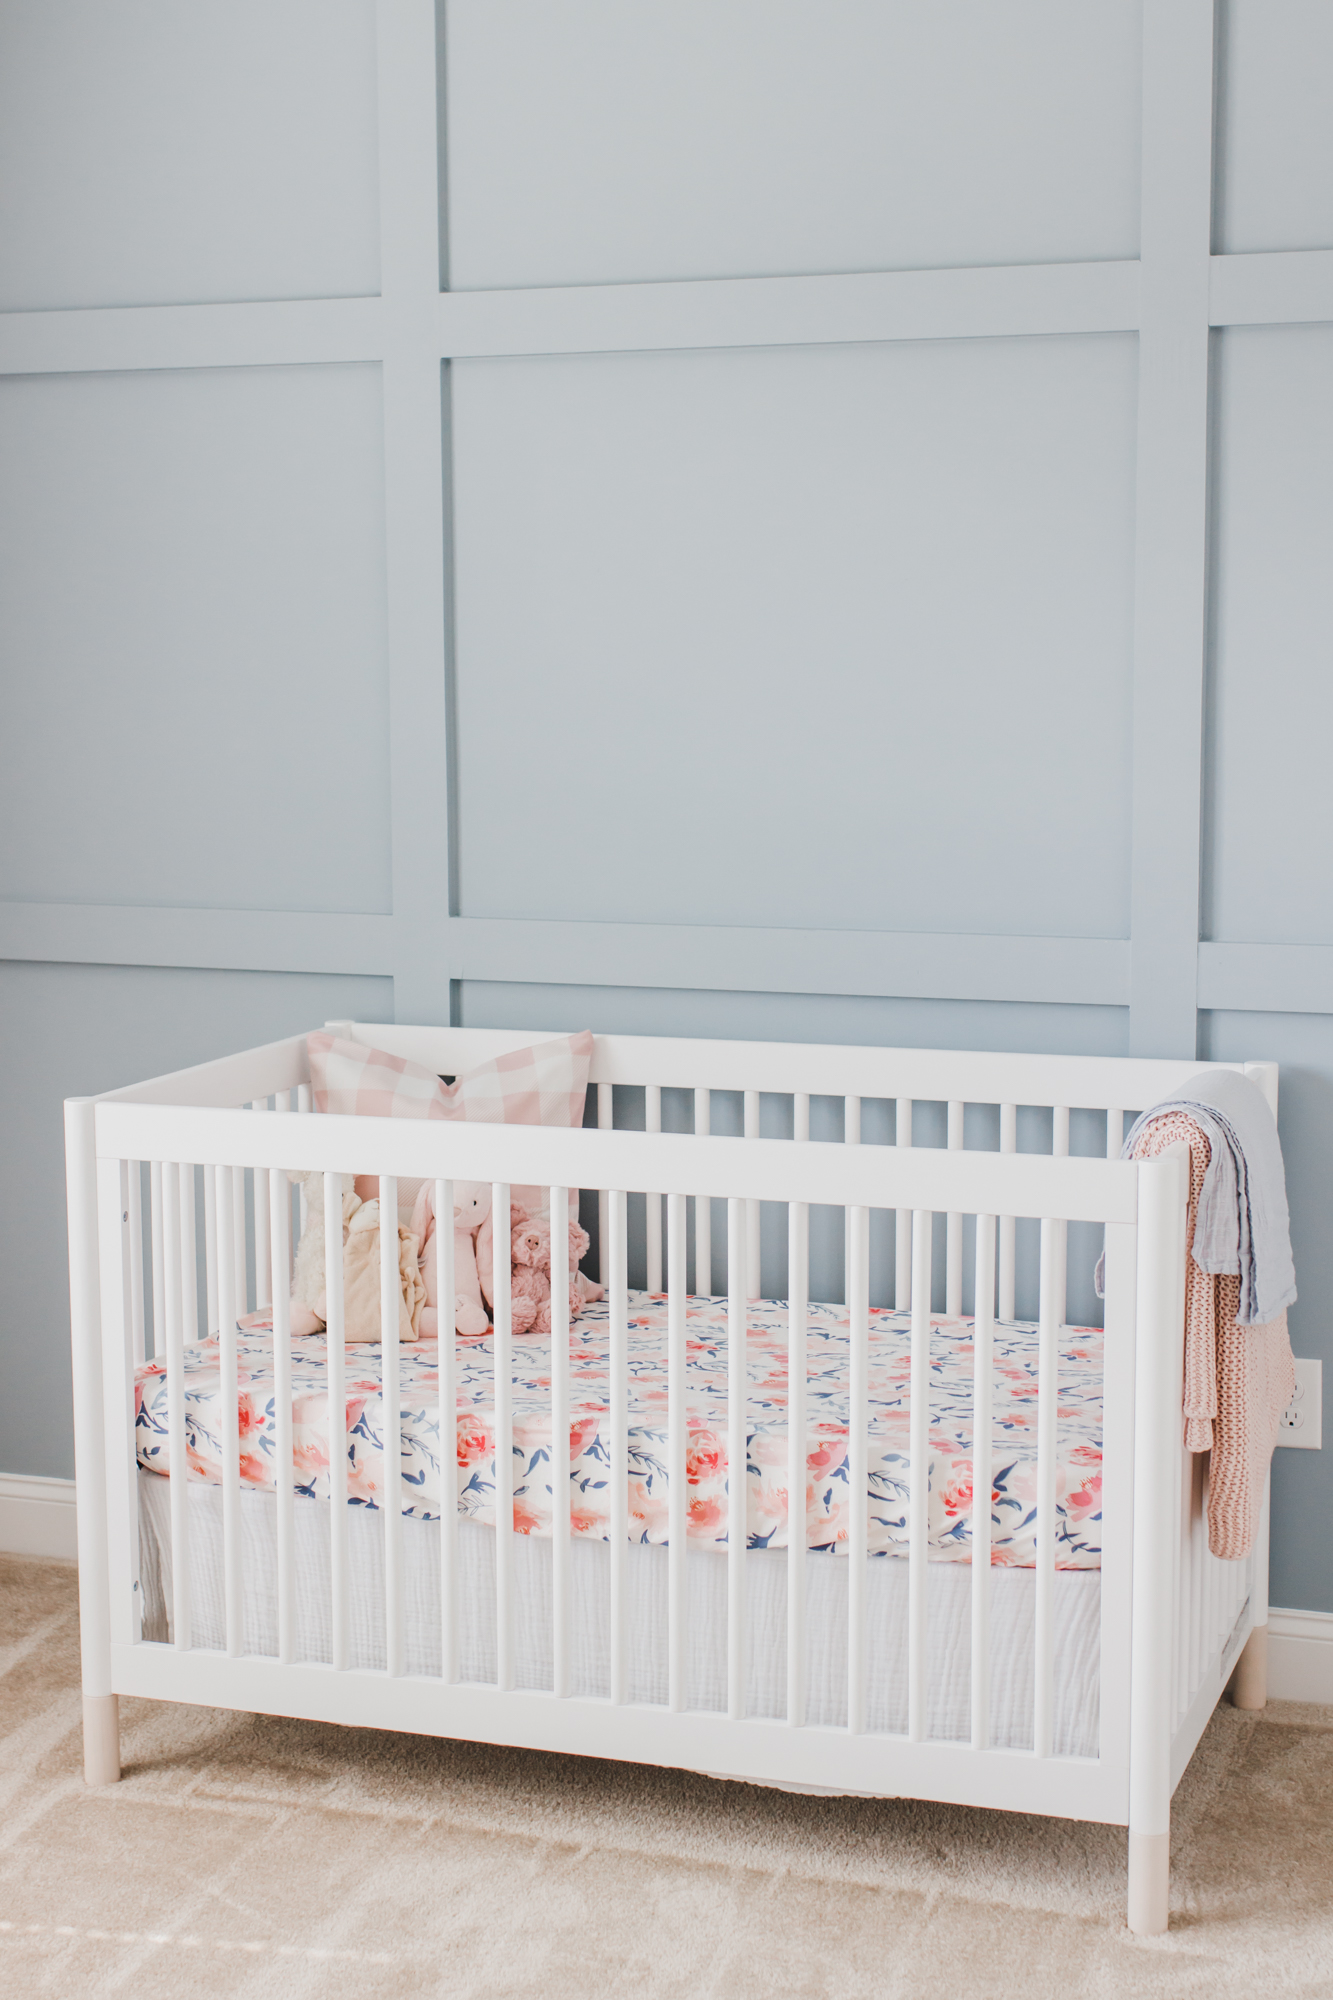 Step inside this gorgeous baby girl's nursery in soft blue and blush tones. Click through for the details. #nursery #babygirl #girlsroom #girlsnursery #girlnursery #girlroom #baby #newbaby | glitterinc.com | @glitterinc